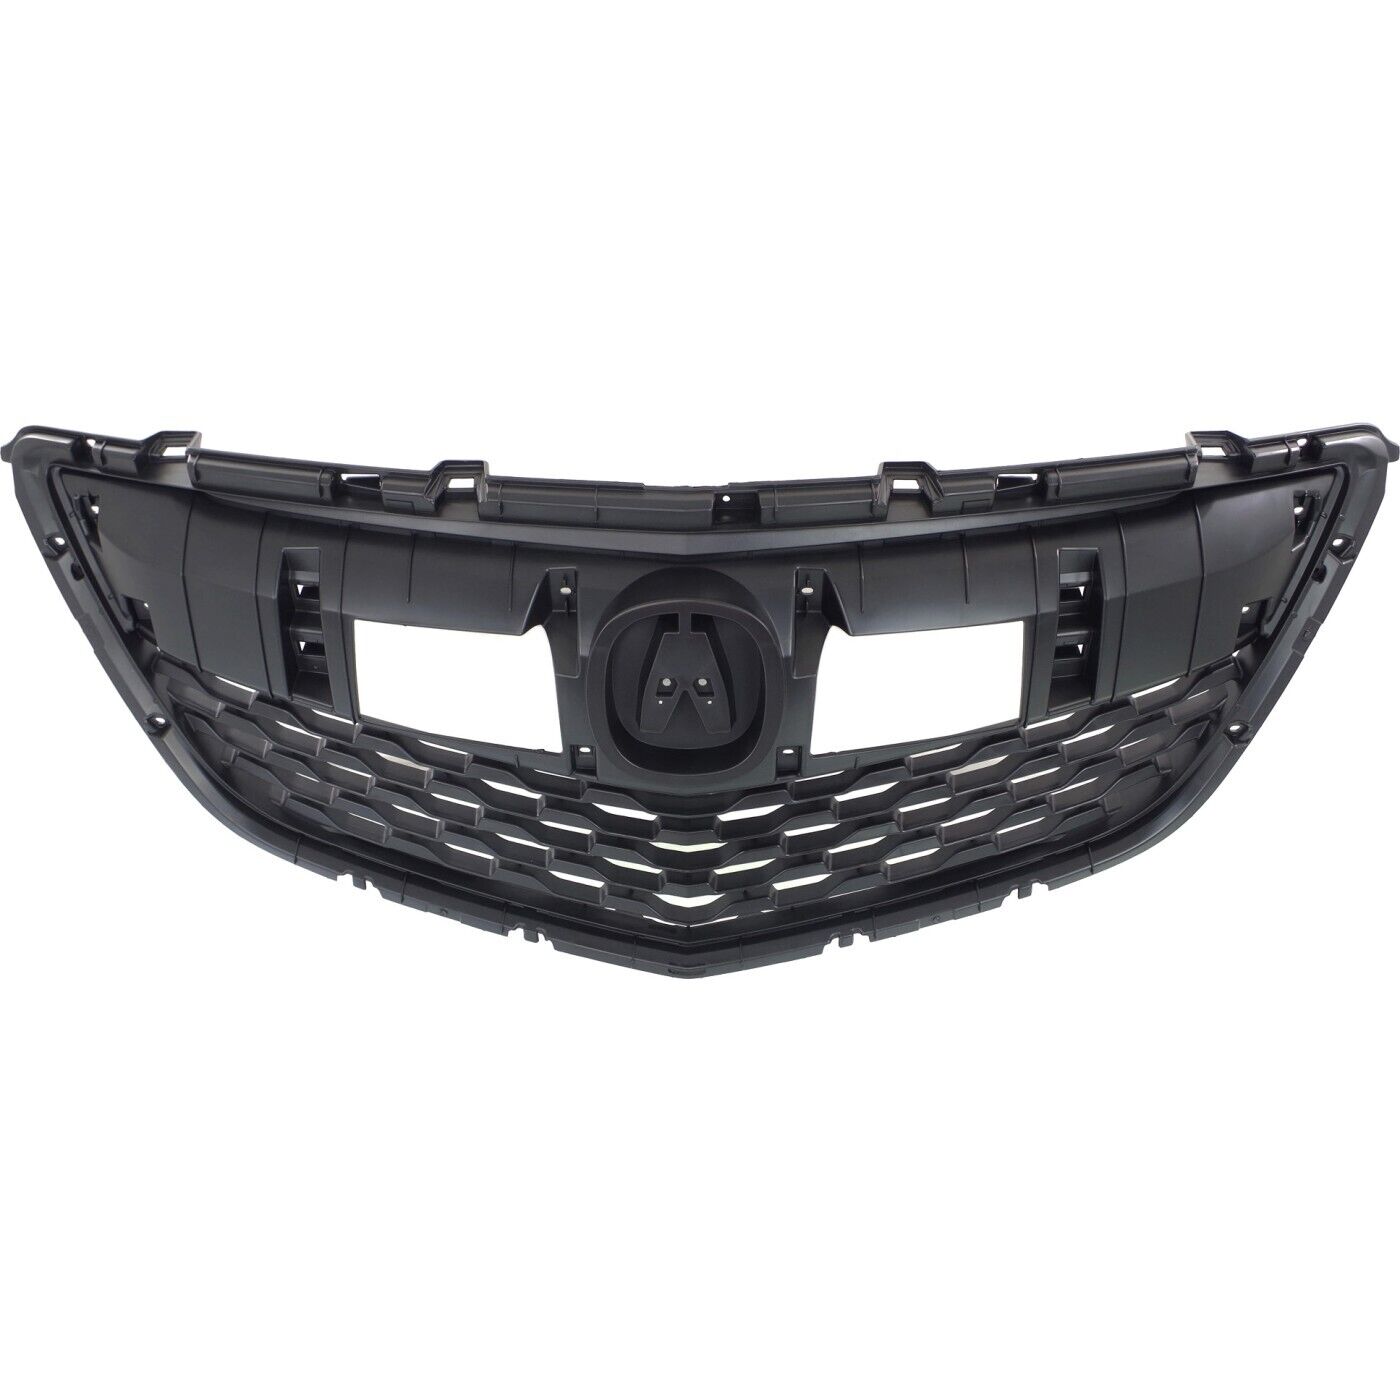 Grille Grill for Acura MDX 2014-2016